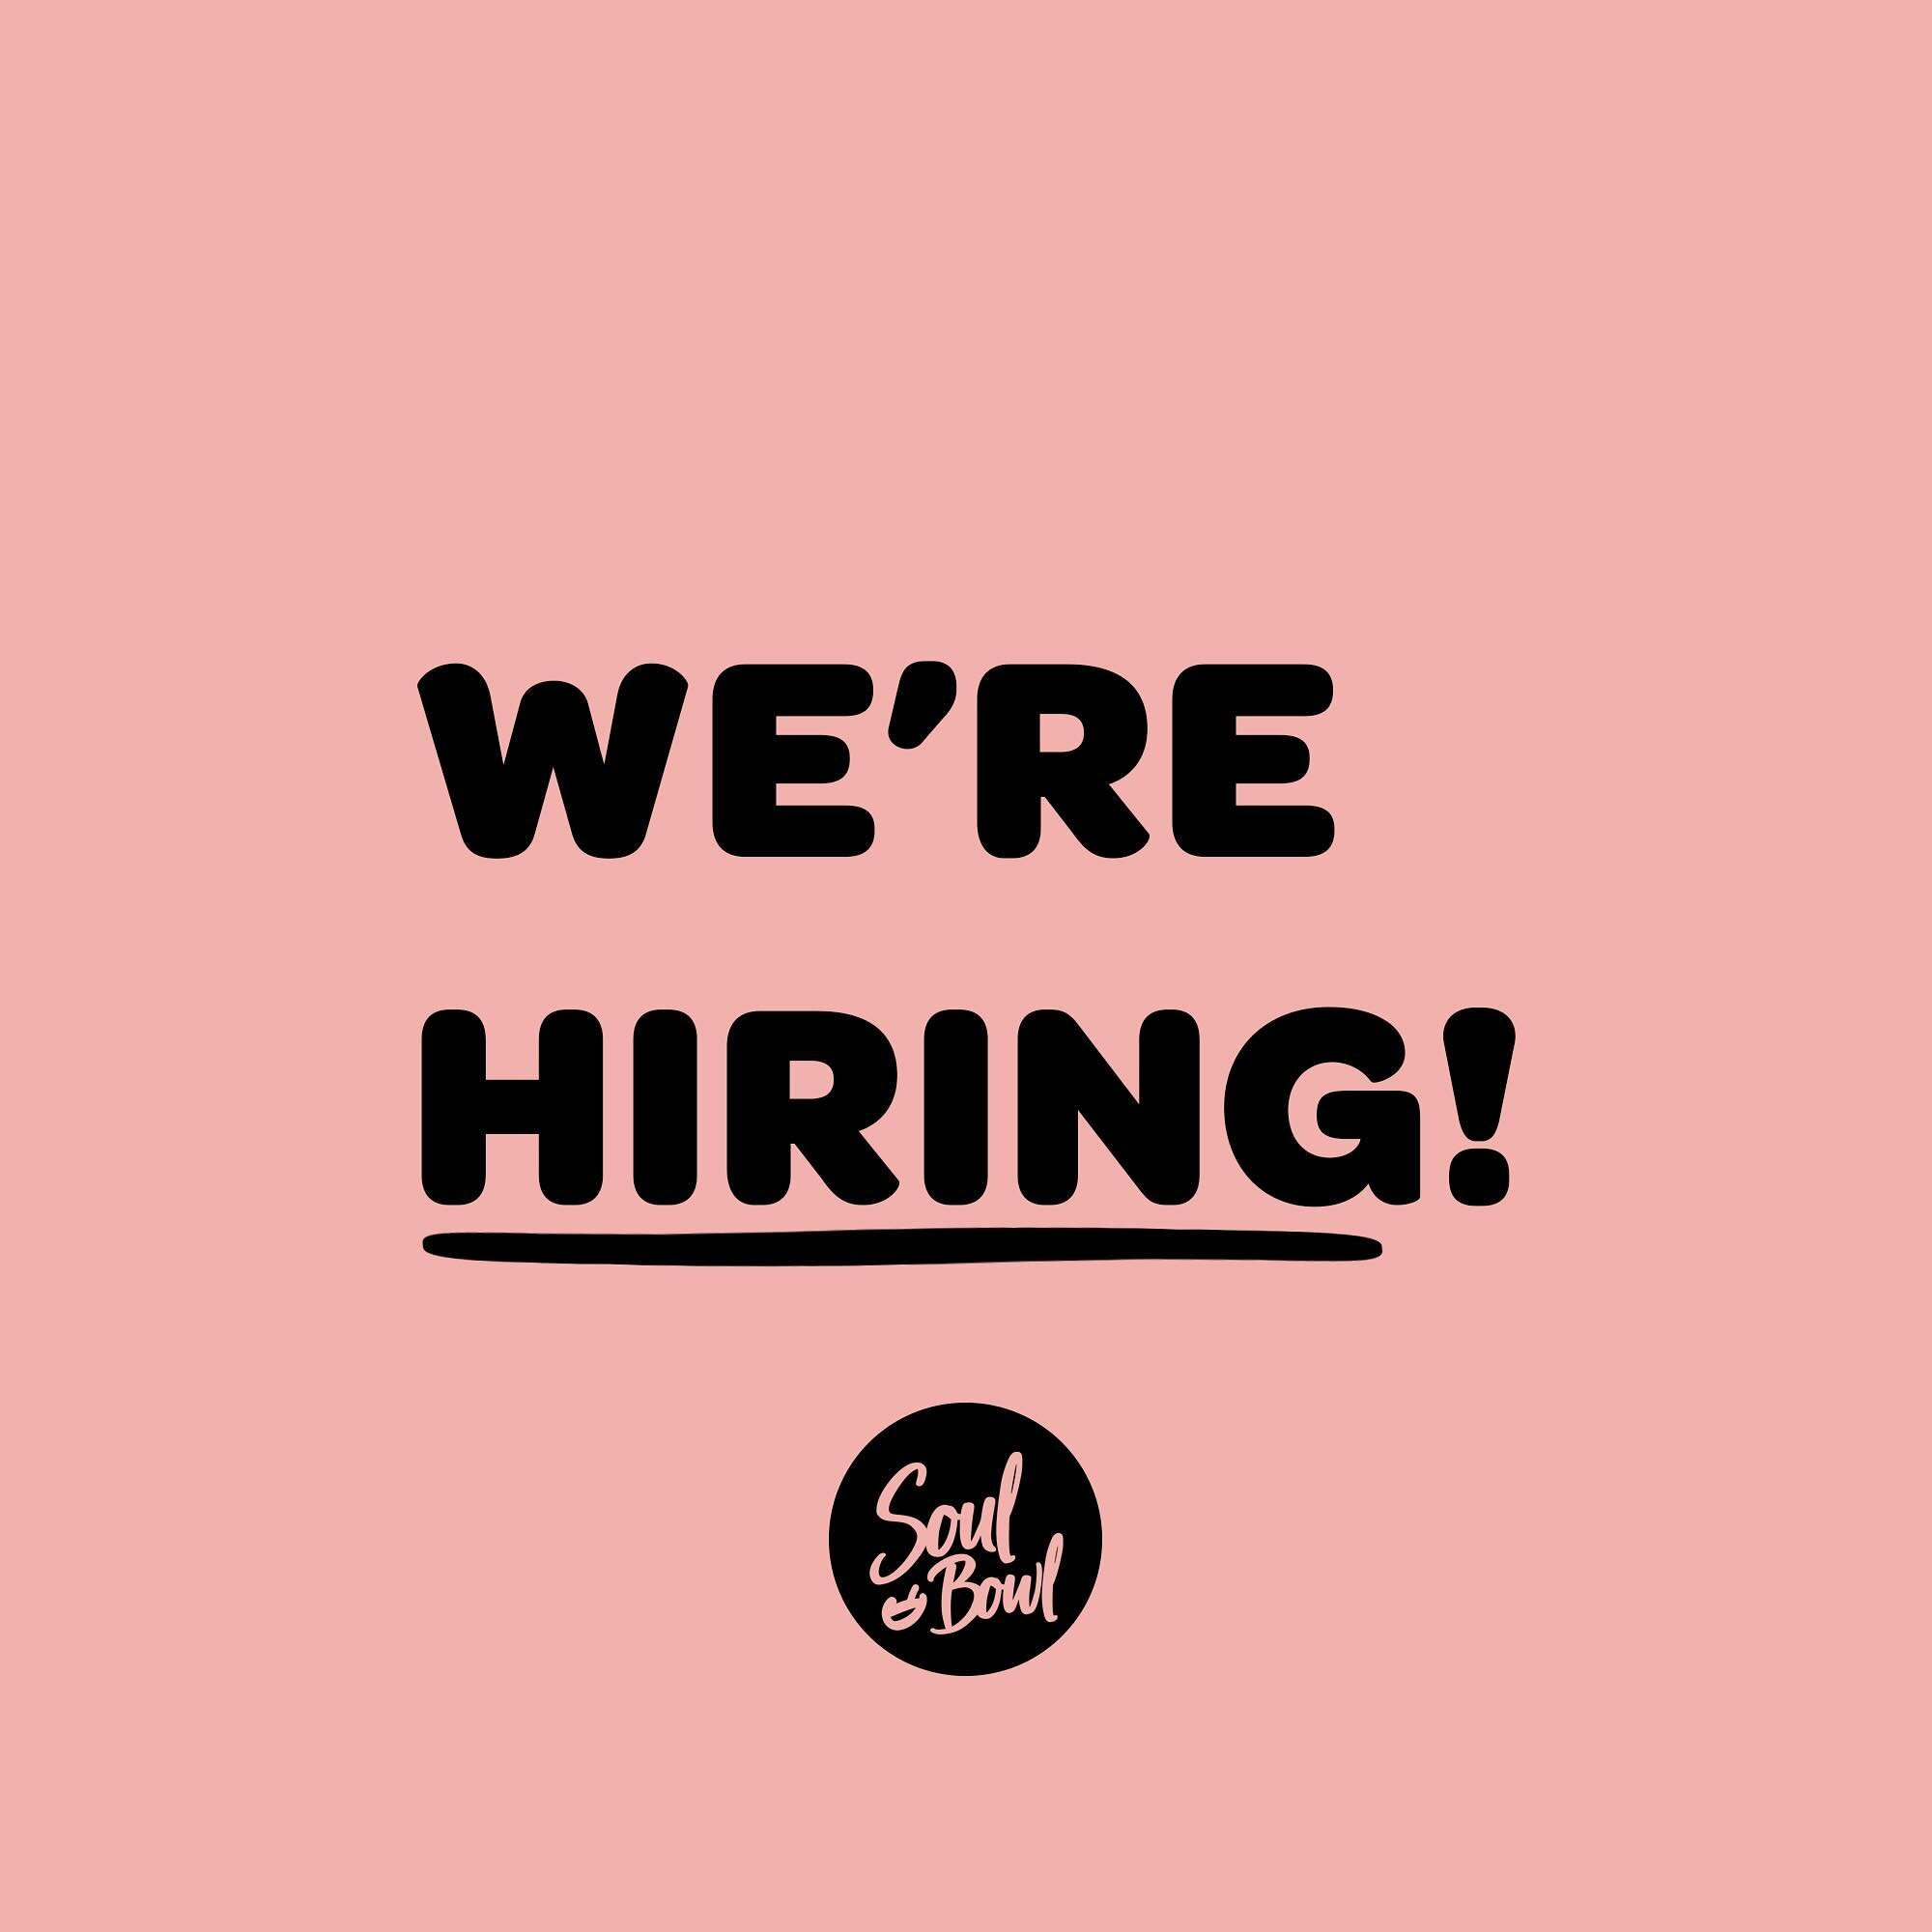 Soul Bowl are Hiring! 

We&rsquo;re looking for fun, energetic &amp; hard working team players to join us at uk festivals over the summer ☀️

If you like the sound of having fun whilst earning some dollar then we&rsquo;d love to hear from you - drop 